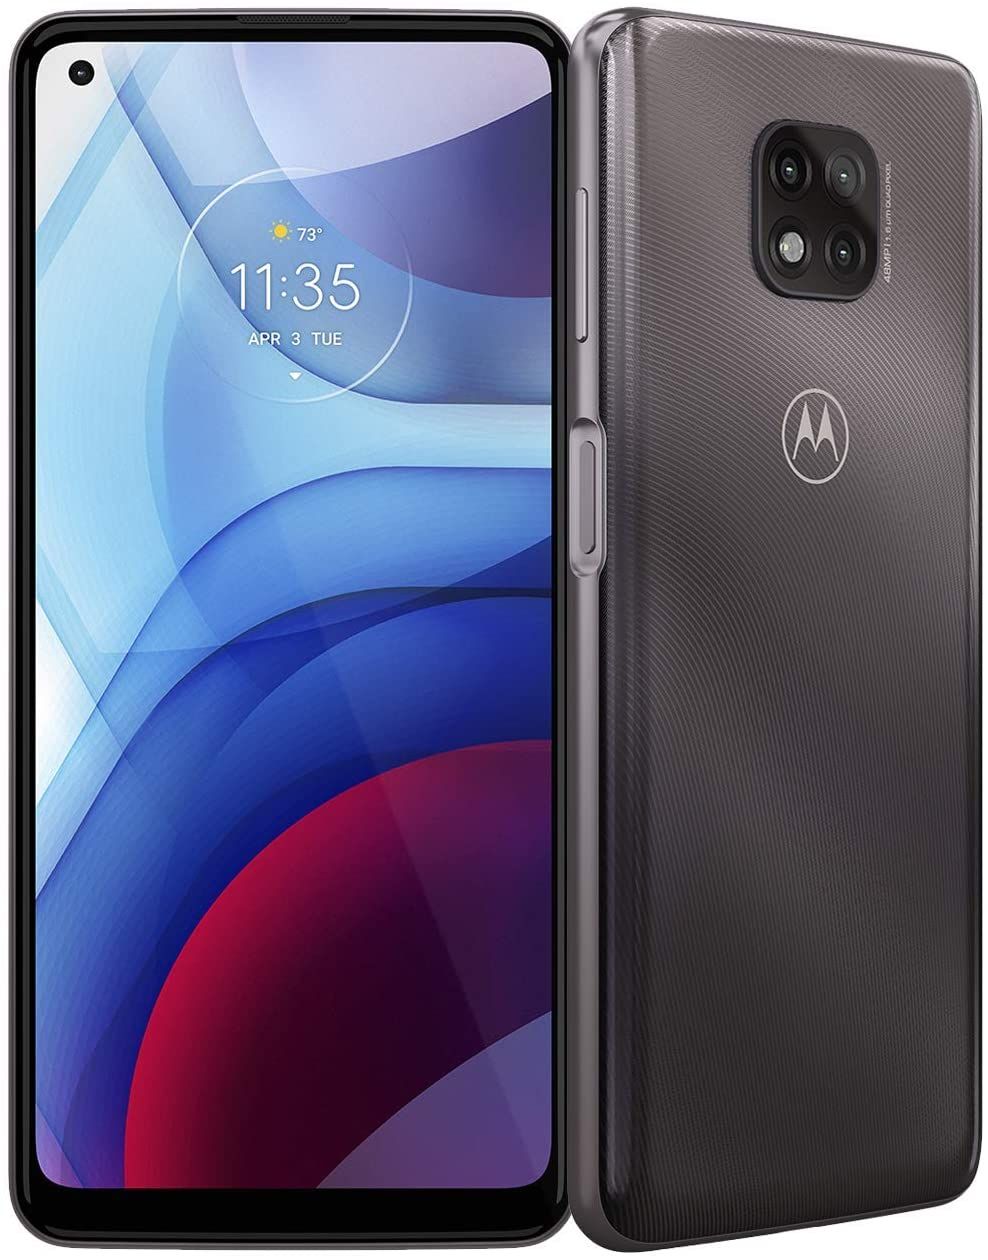 Moto G Power 2021 front and rear